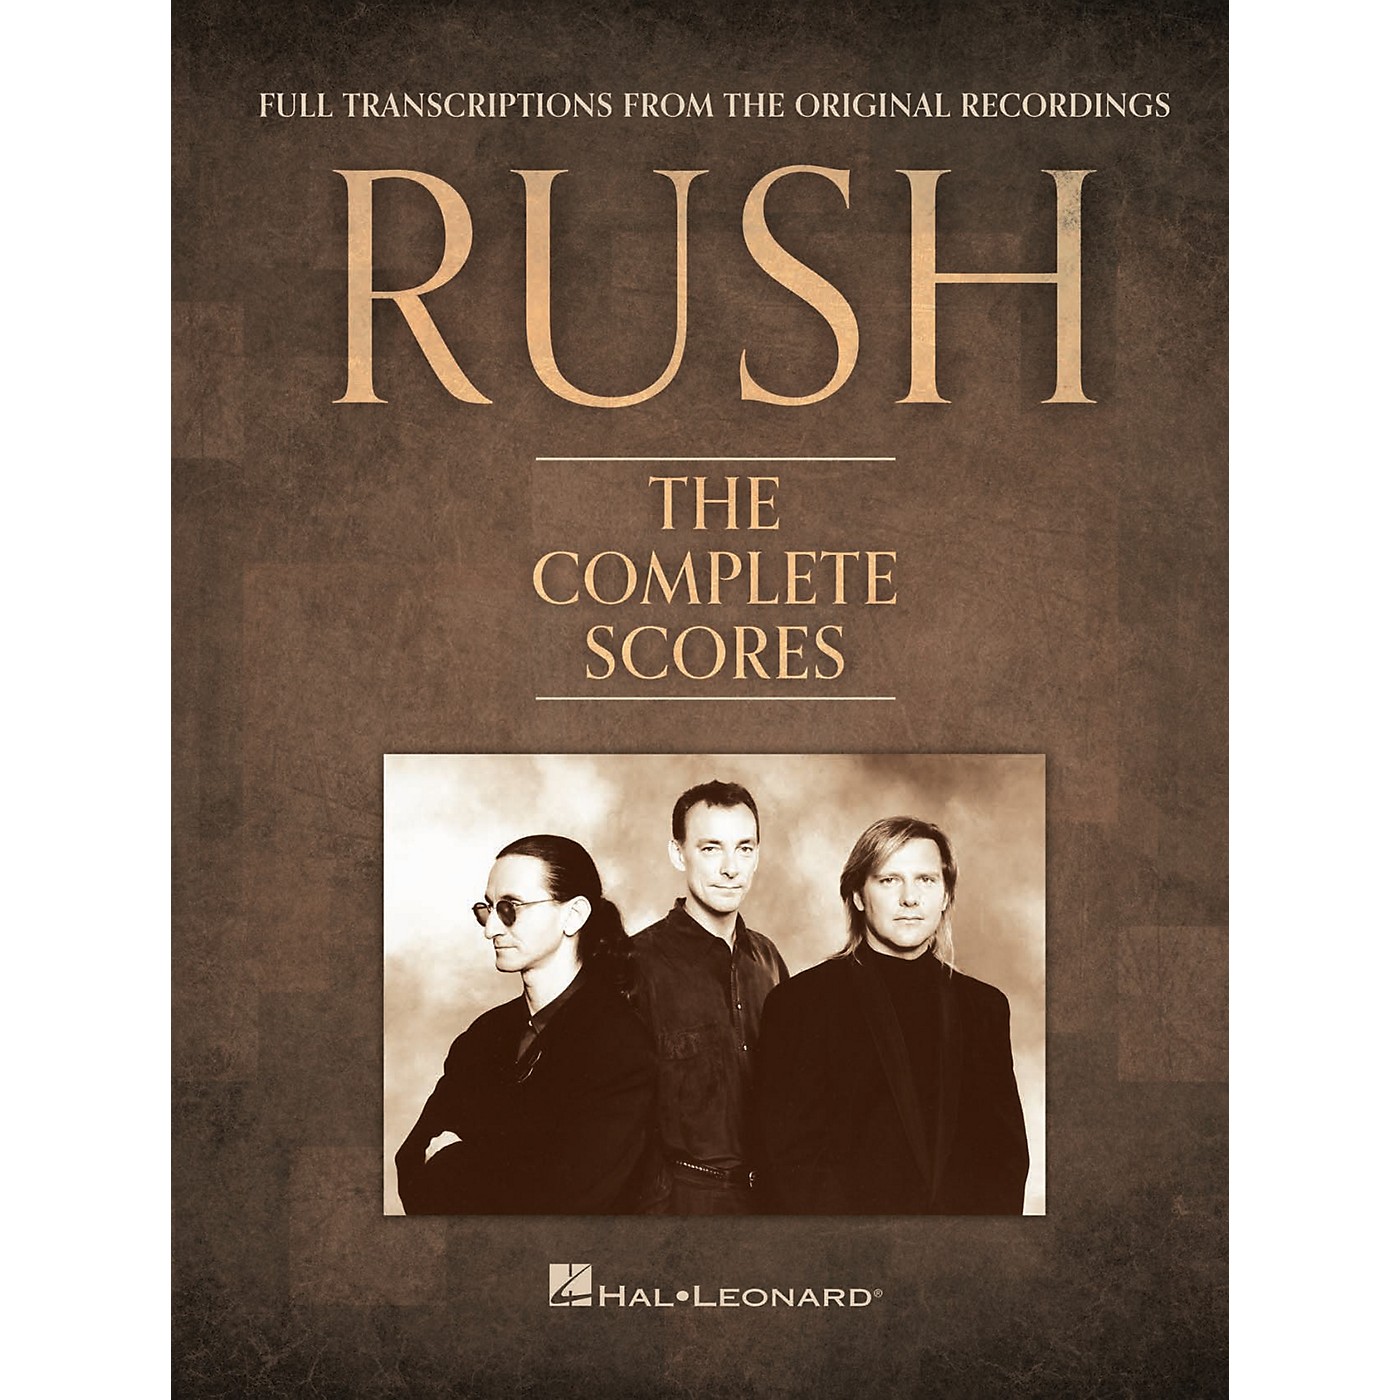 Hal Leonard RUSH - The Complete Scores (Deluxe Hardcover Book with Protective Slip Case) thumbnail